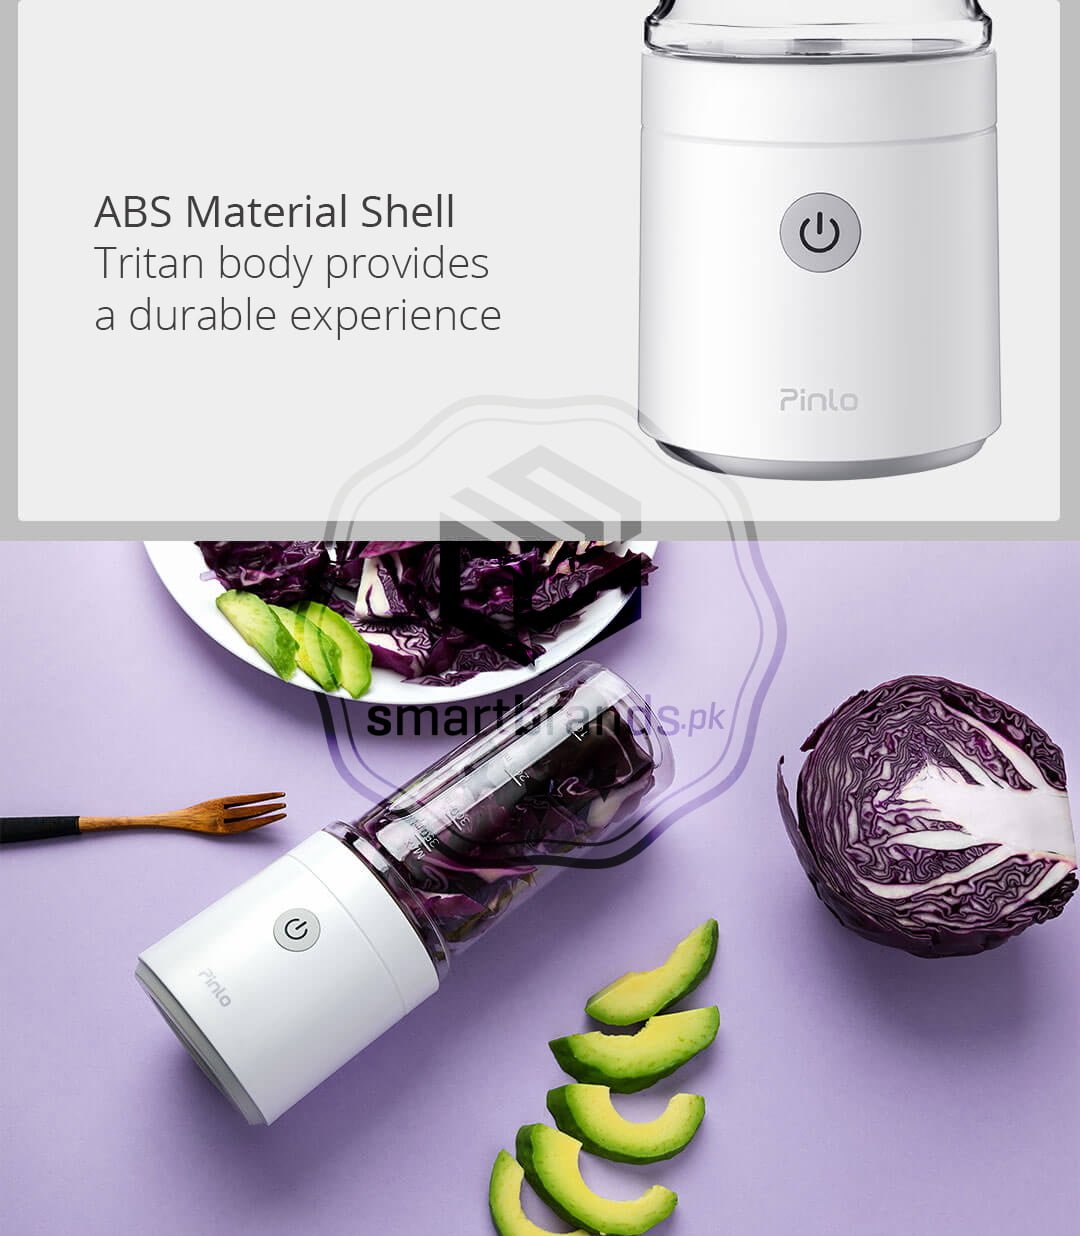 ABS Material Shell Tritan body provides a durable experience